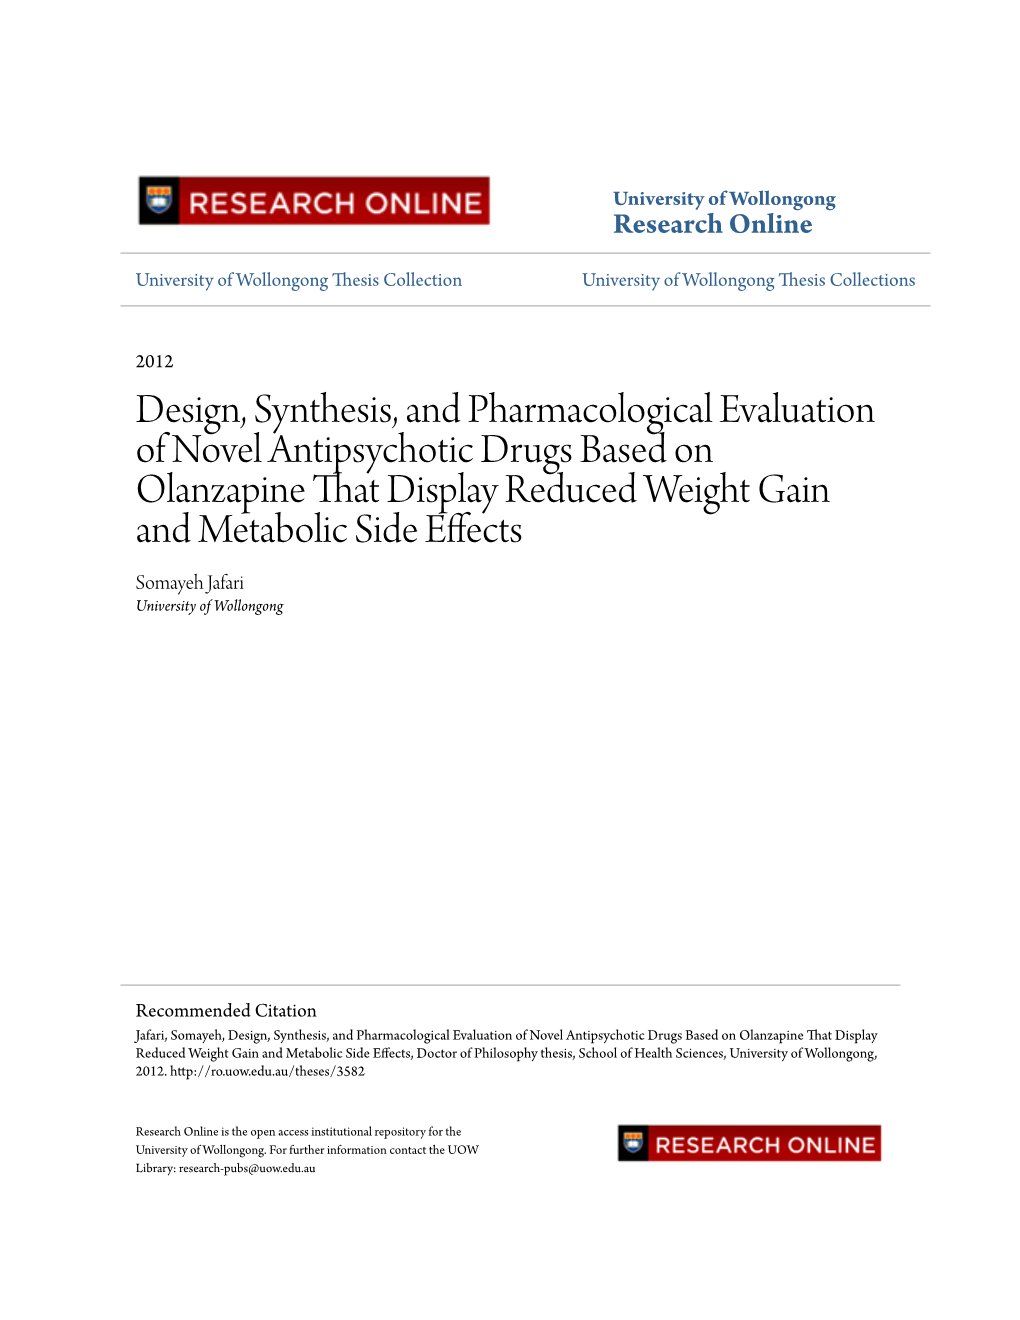 Design, Synthesis, and Pharmacological Evaluation Of